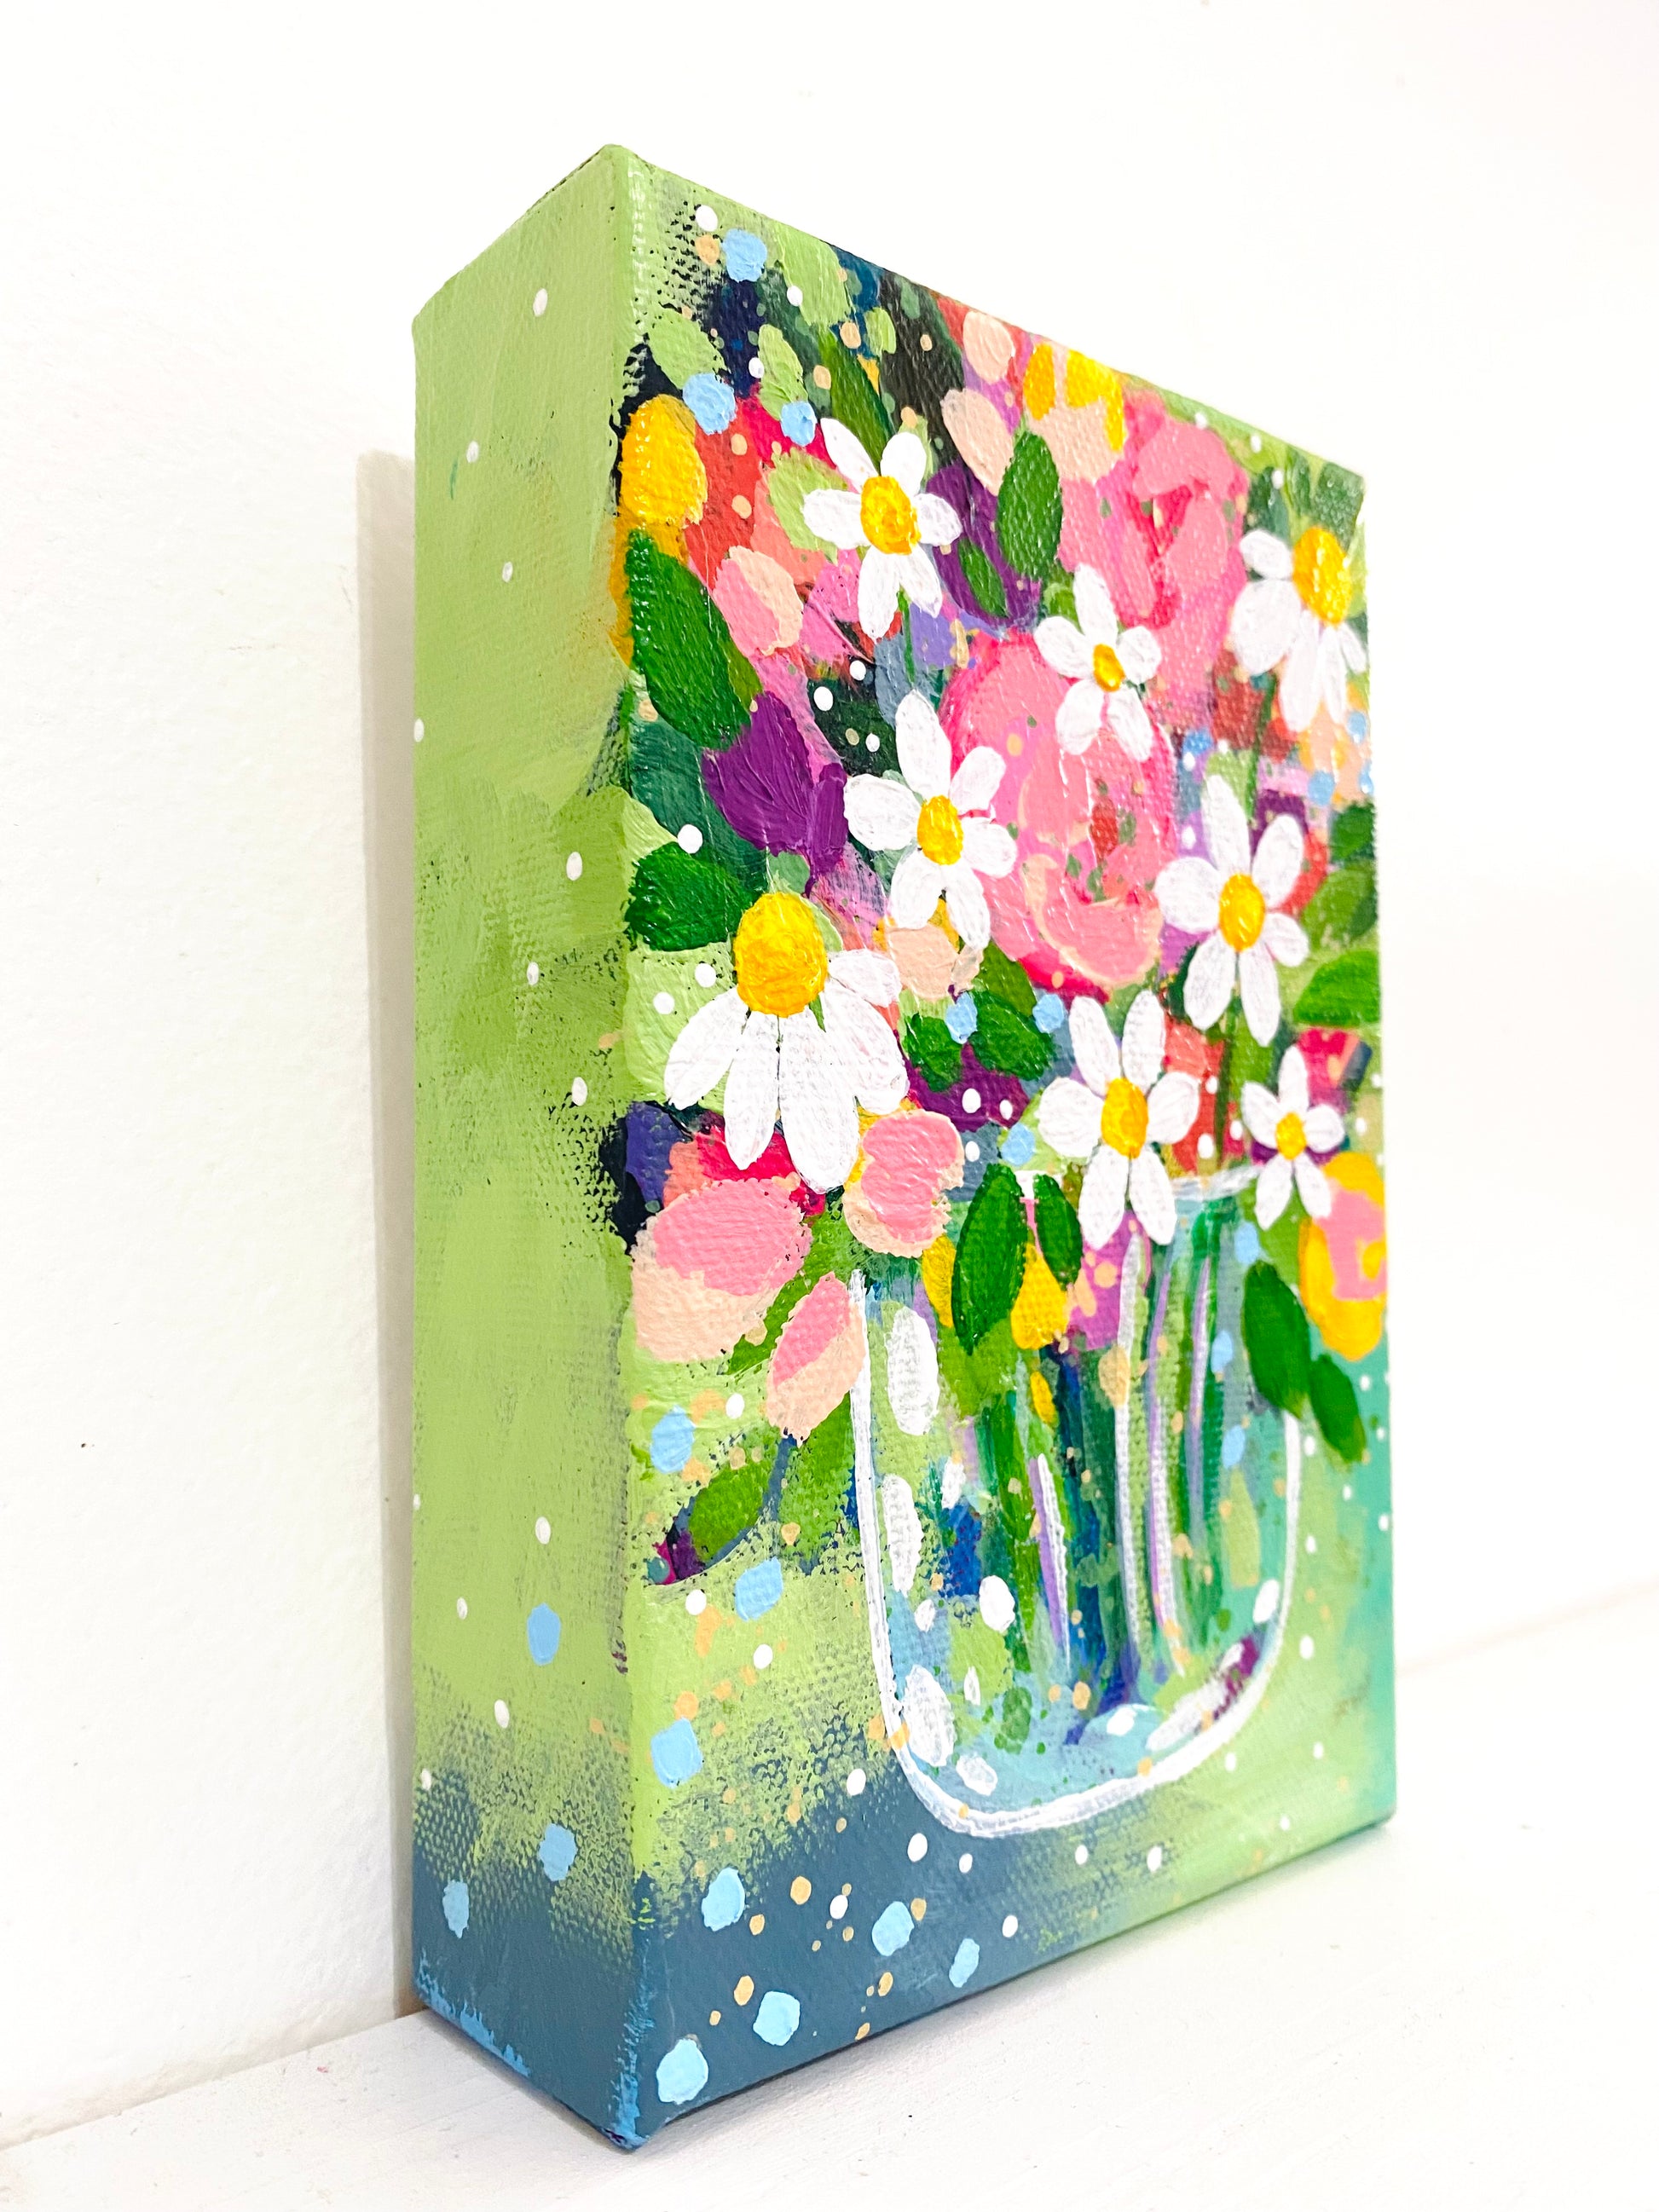 Floral Original Painting Love Grows Here Bouquet 4x6 inch canvas